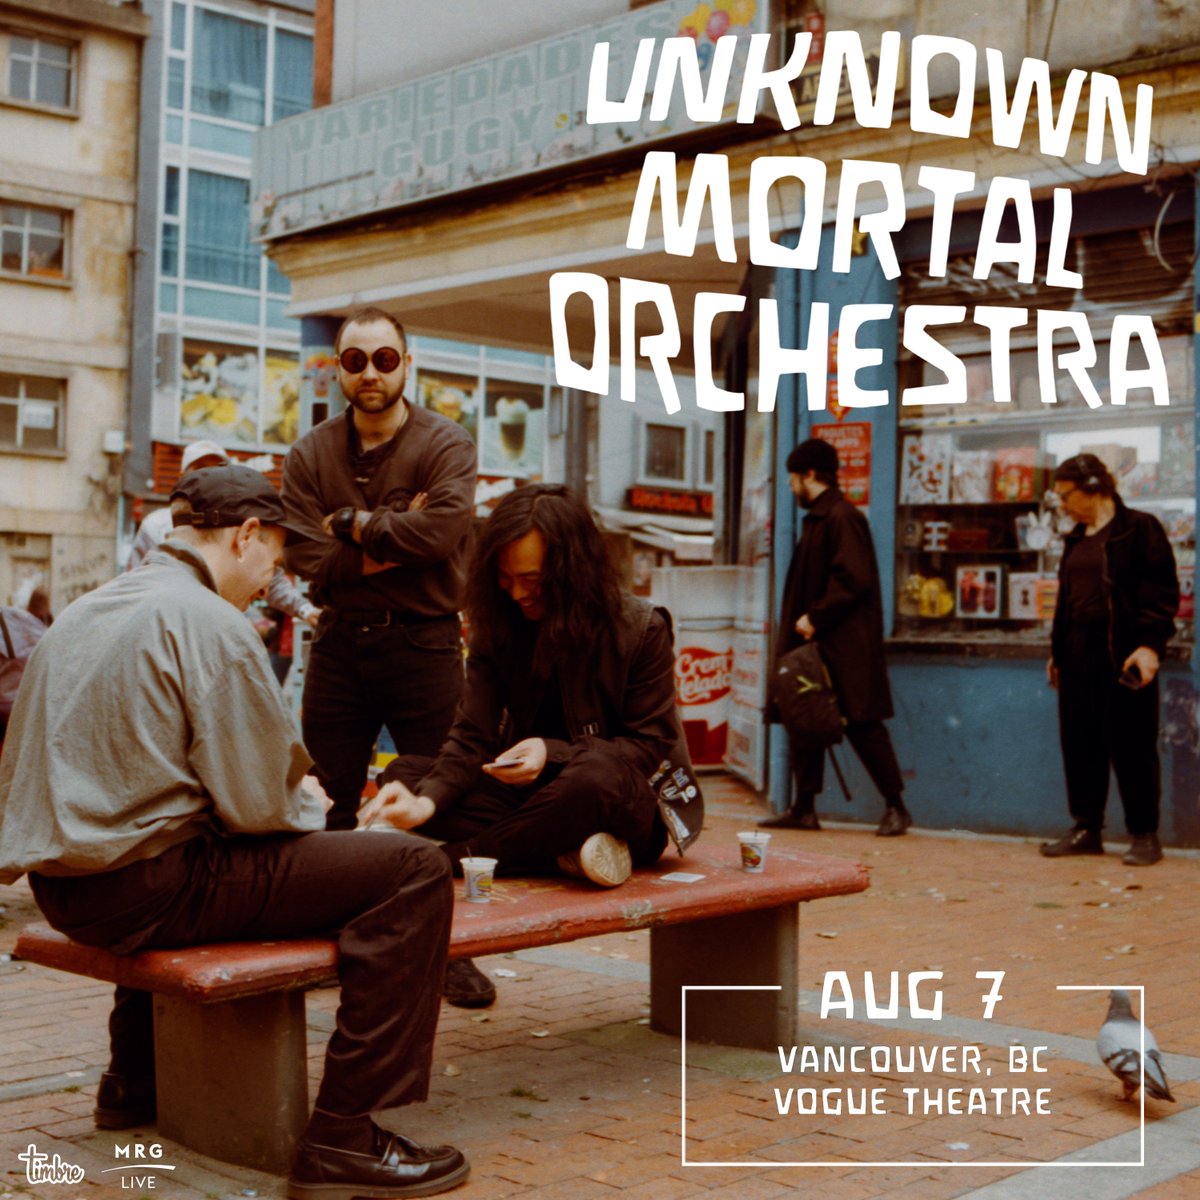 ON SALE NOW! @UMO return to Vancouver Aug 7 @VogueTheatre - Tickets: admitone.com/events/unknown…